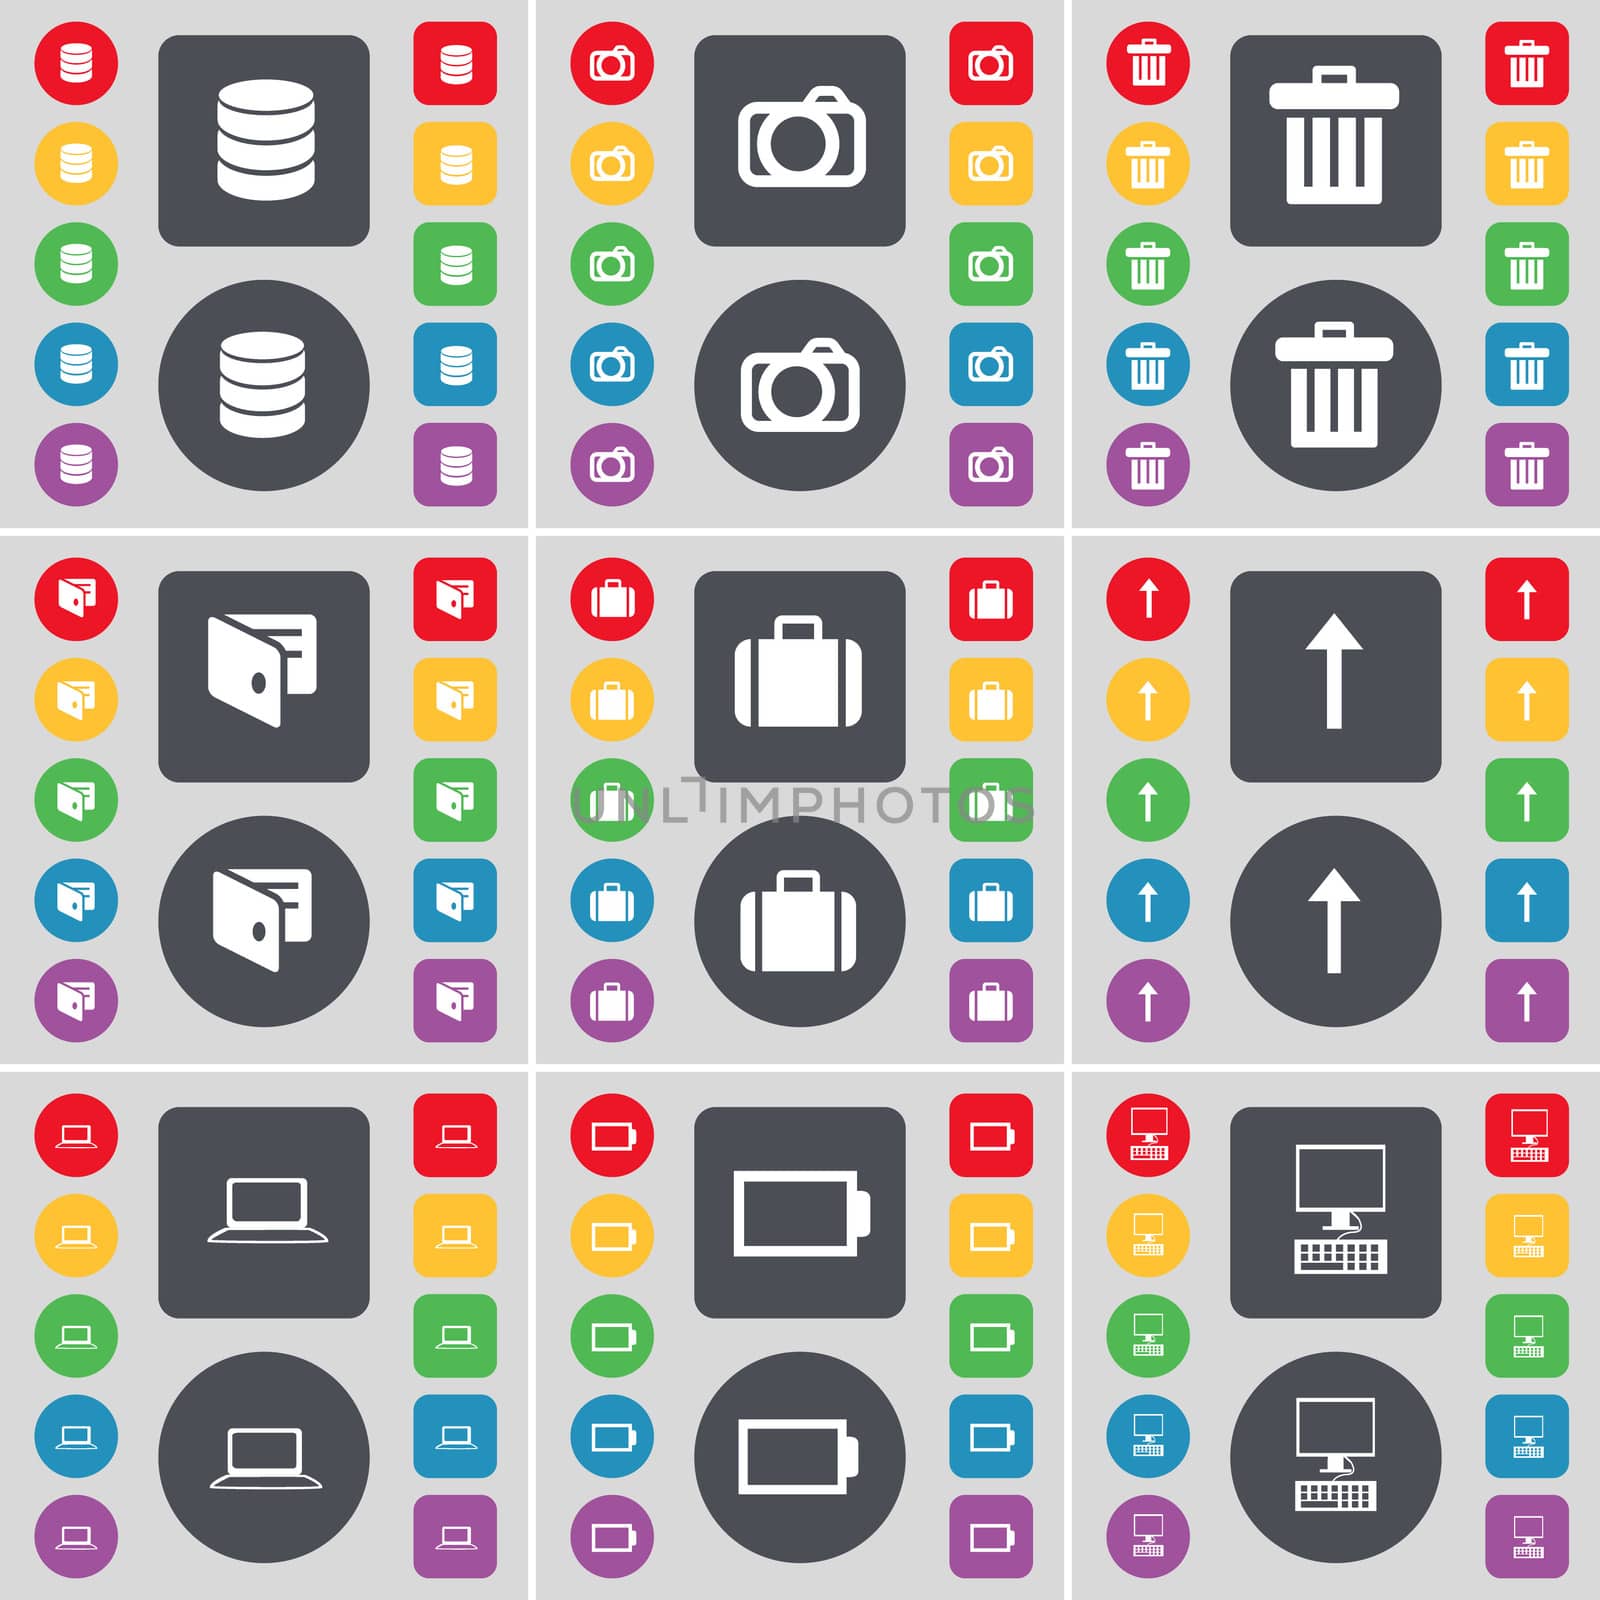 Database, Camera, Trash can, Wallet, Suitcase, Arrow up, Laptop, Battery, PC icon symbol. A large set of flat, colored buttons for your design.  by serhii_lohvyniuk